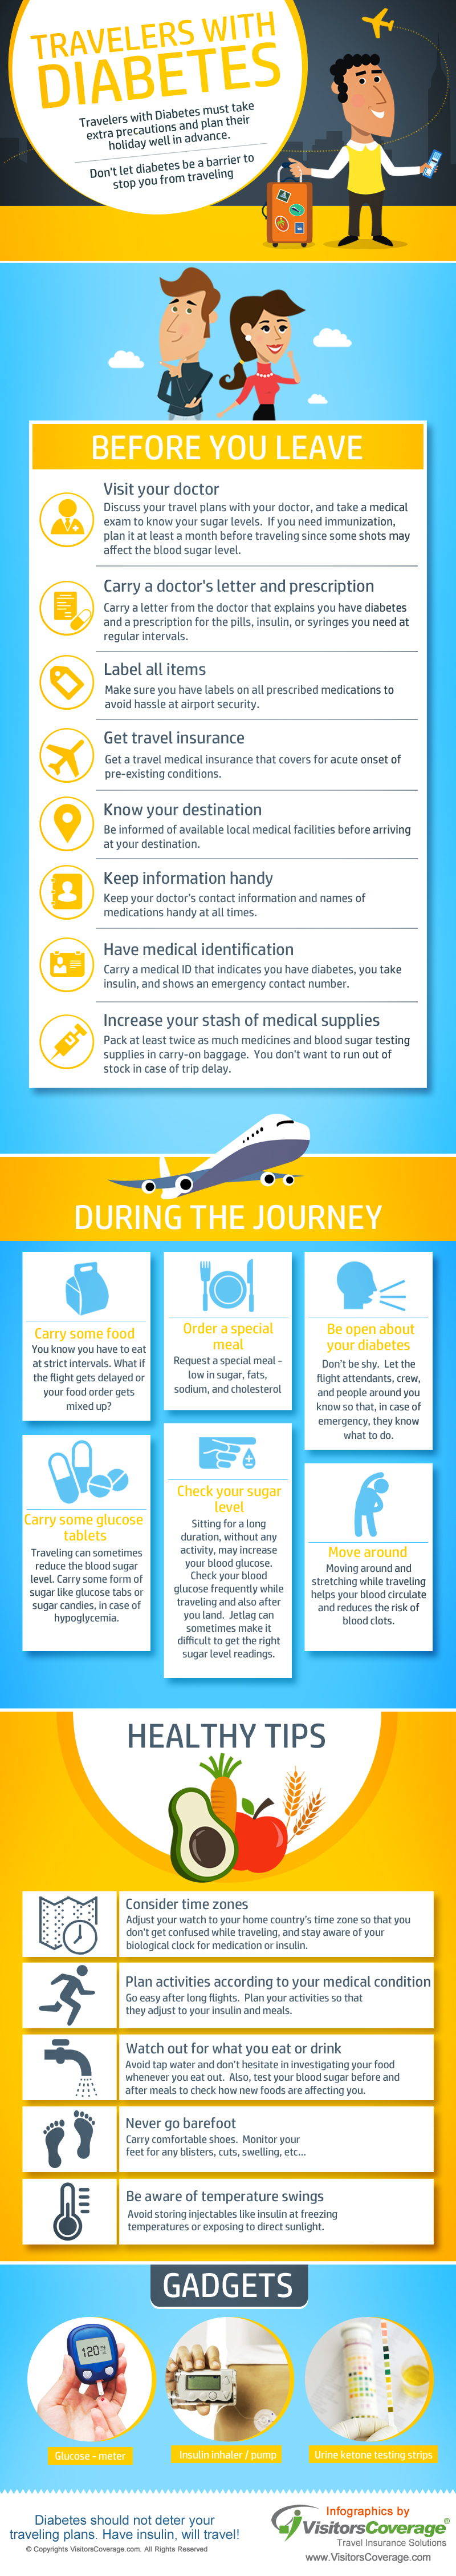 Travel Tips for Travelers with Diabetes